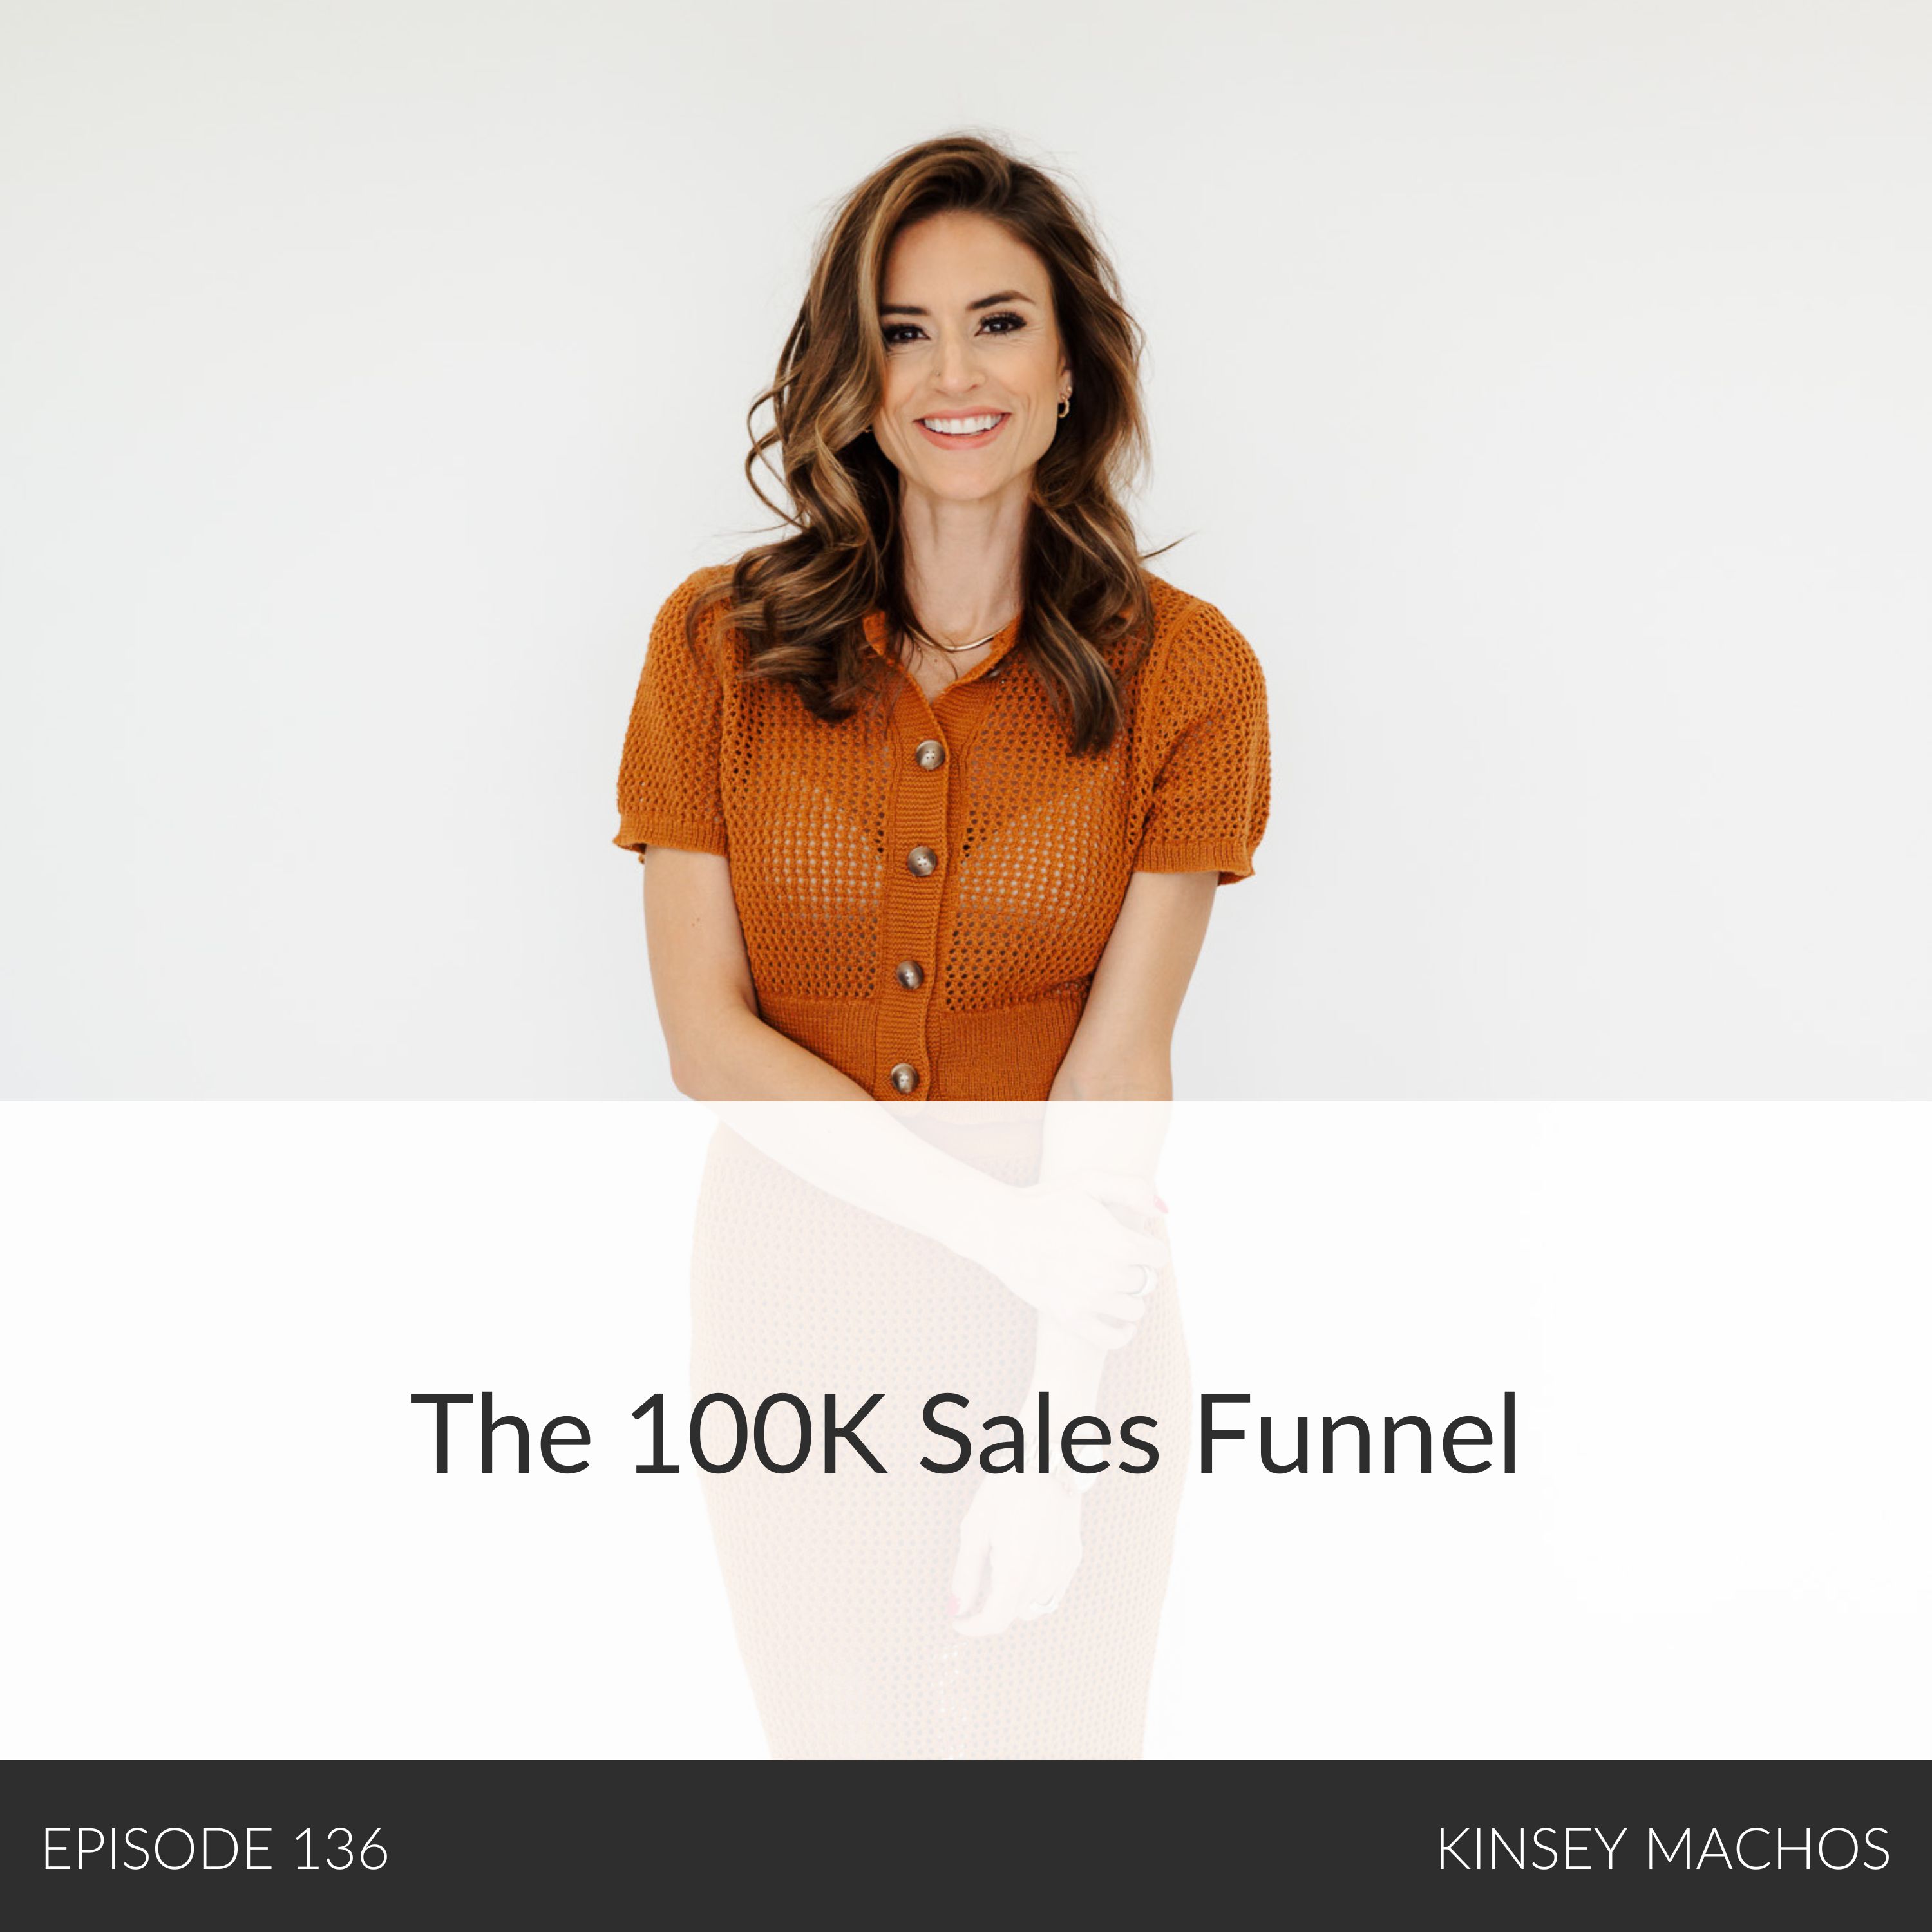 The 100K Sales Funnel